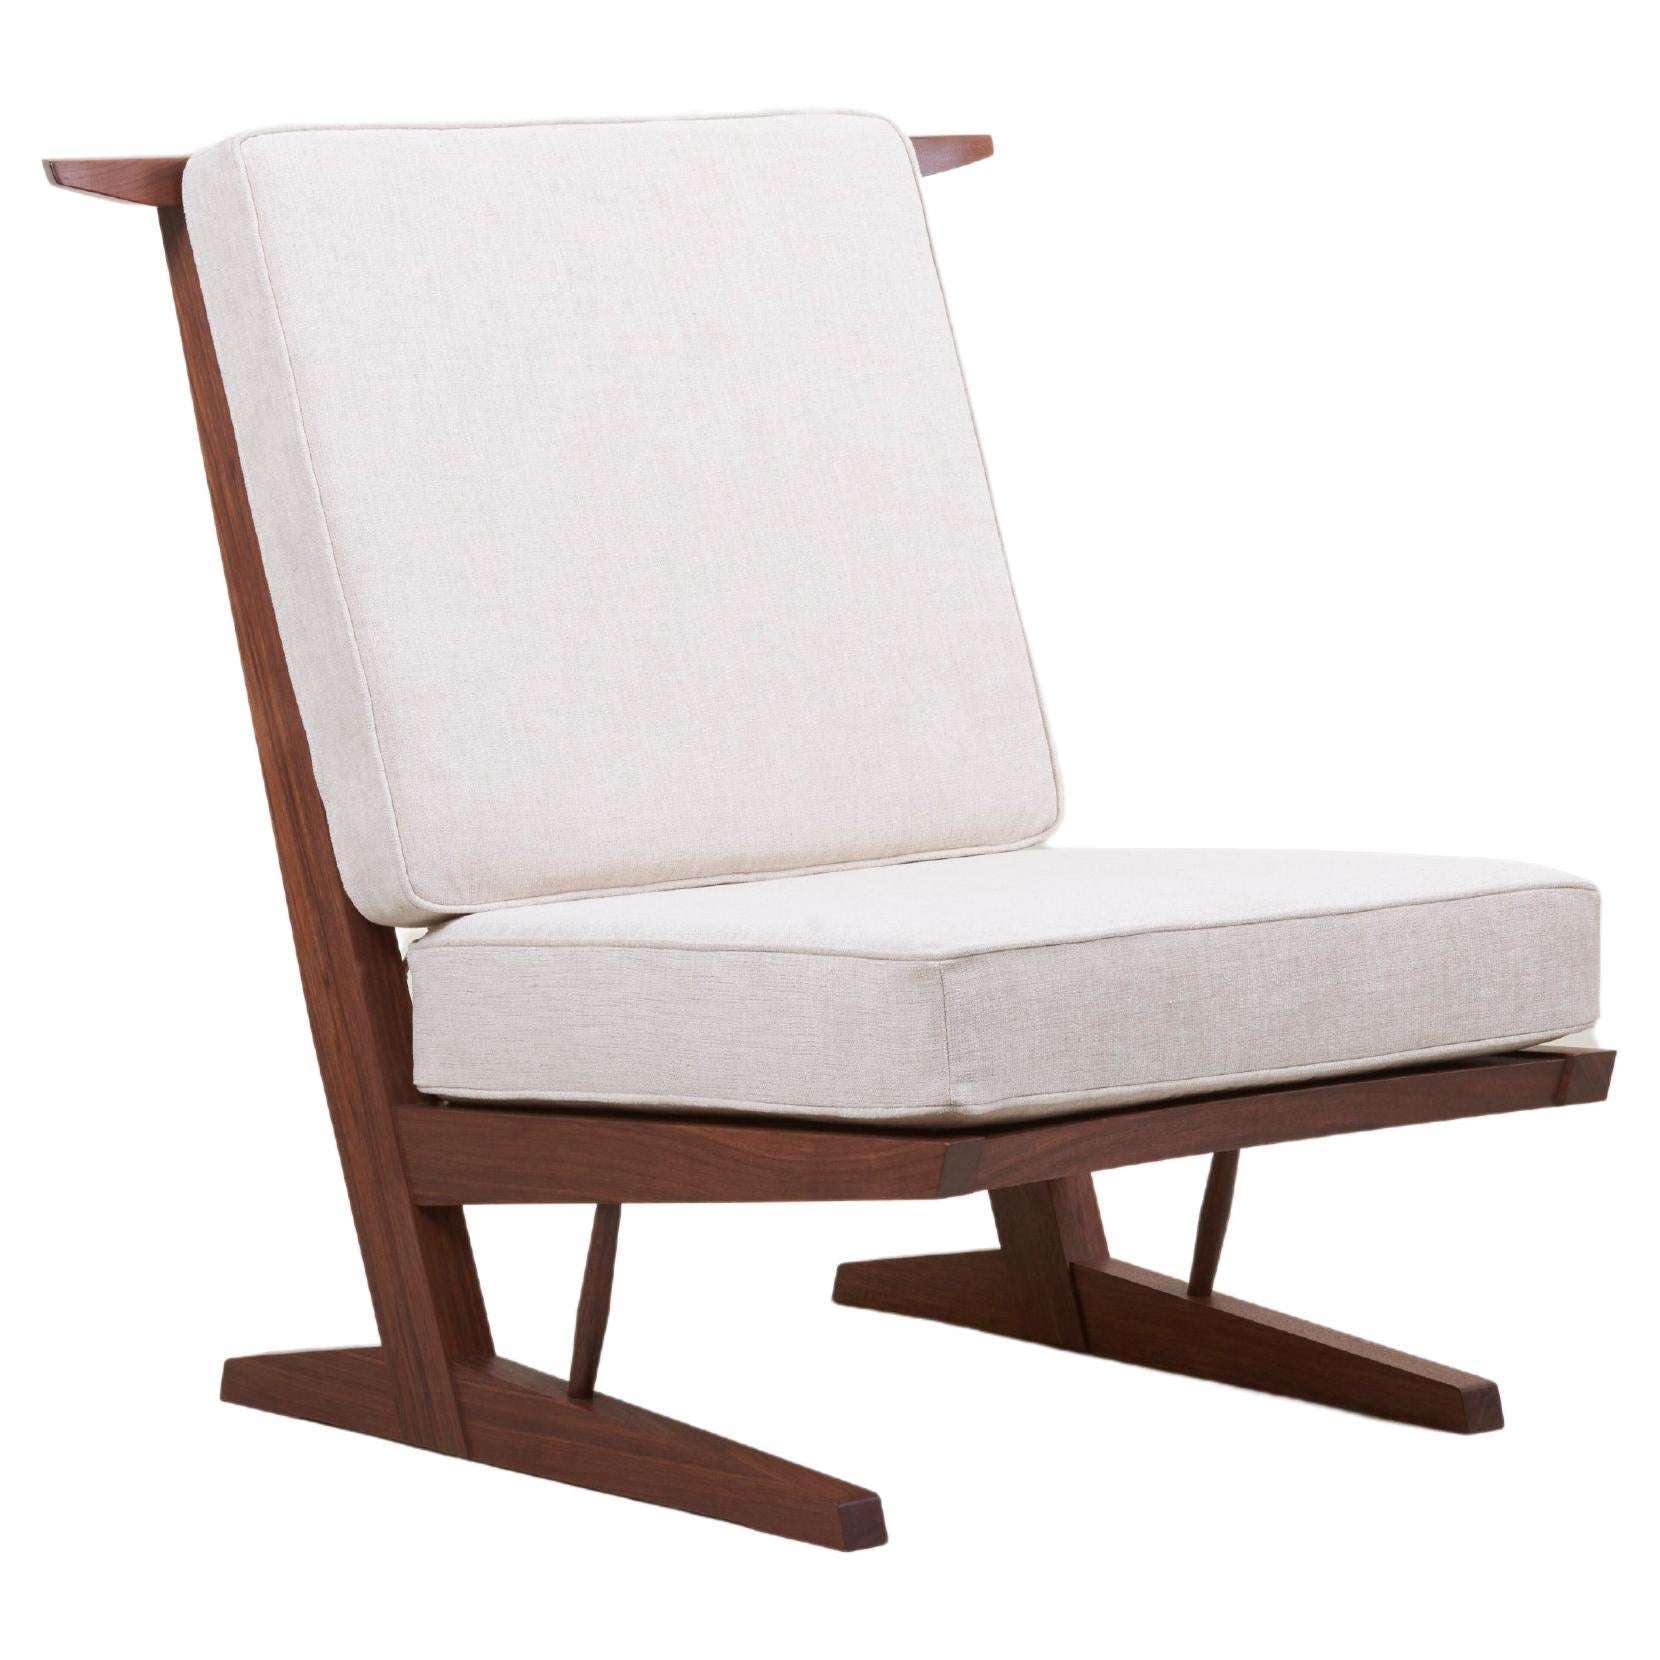 Conoid Lounge Chair by Nakashima Woodworkers